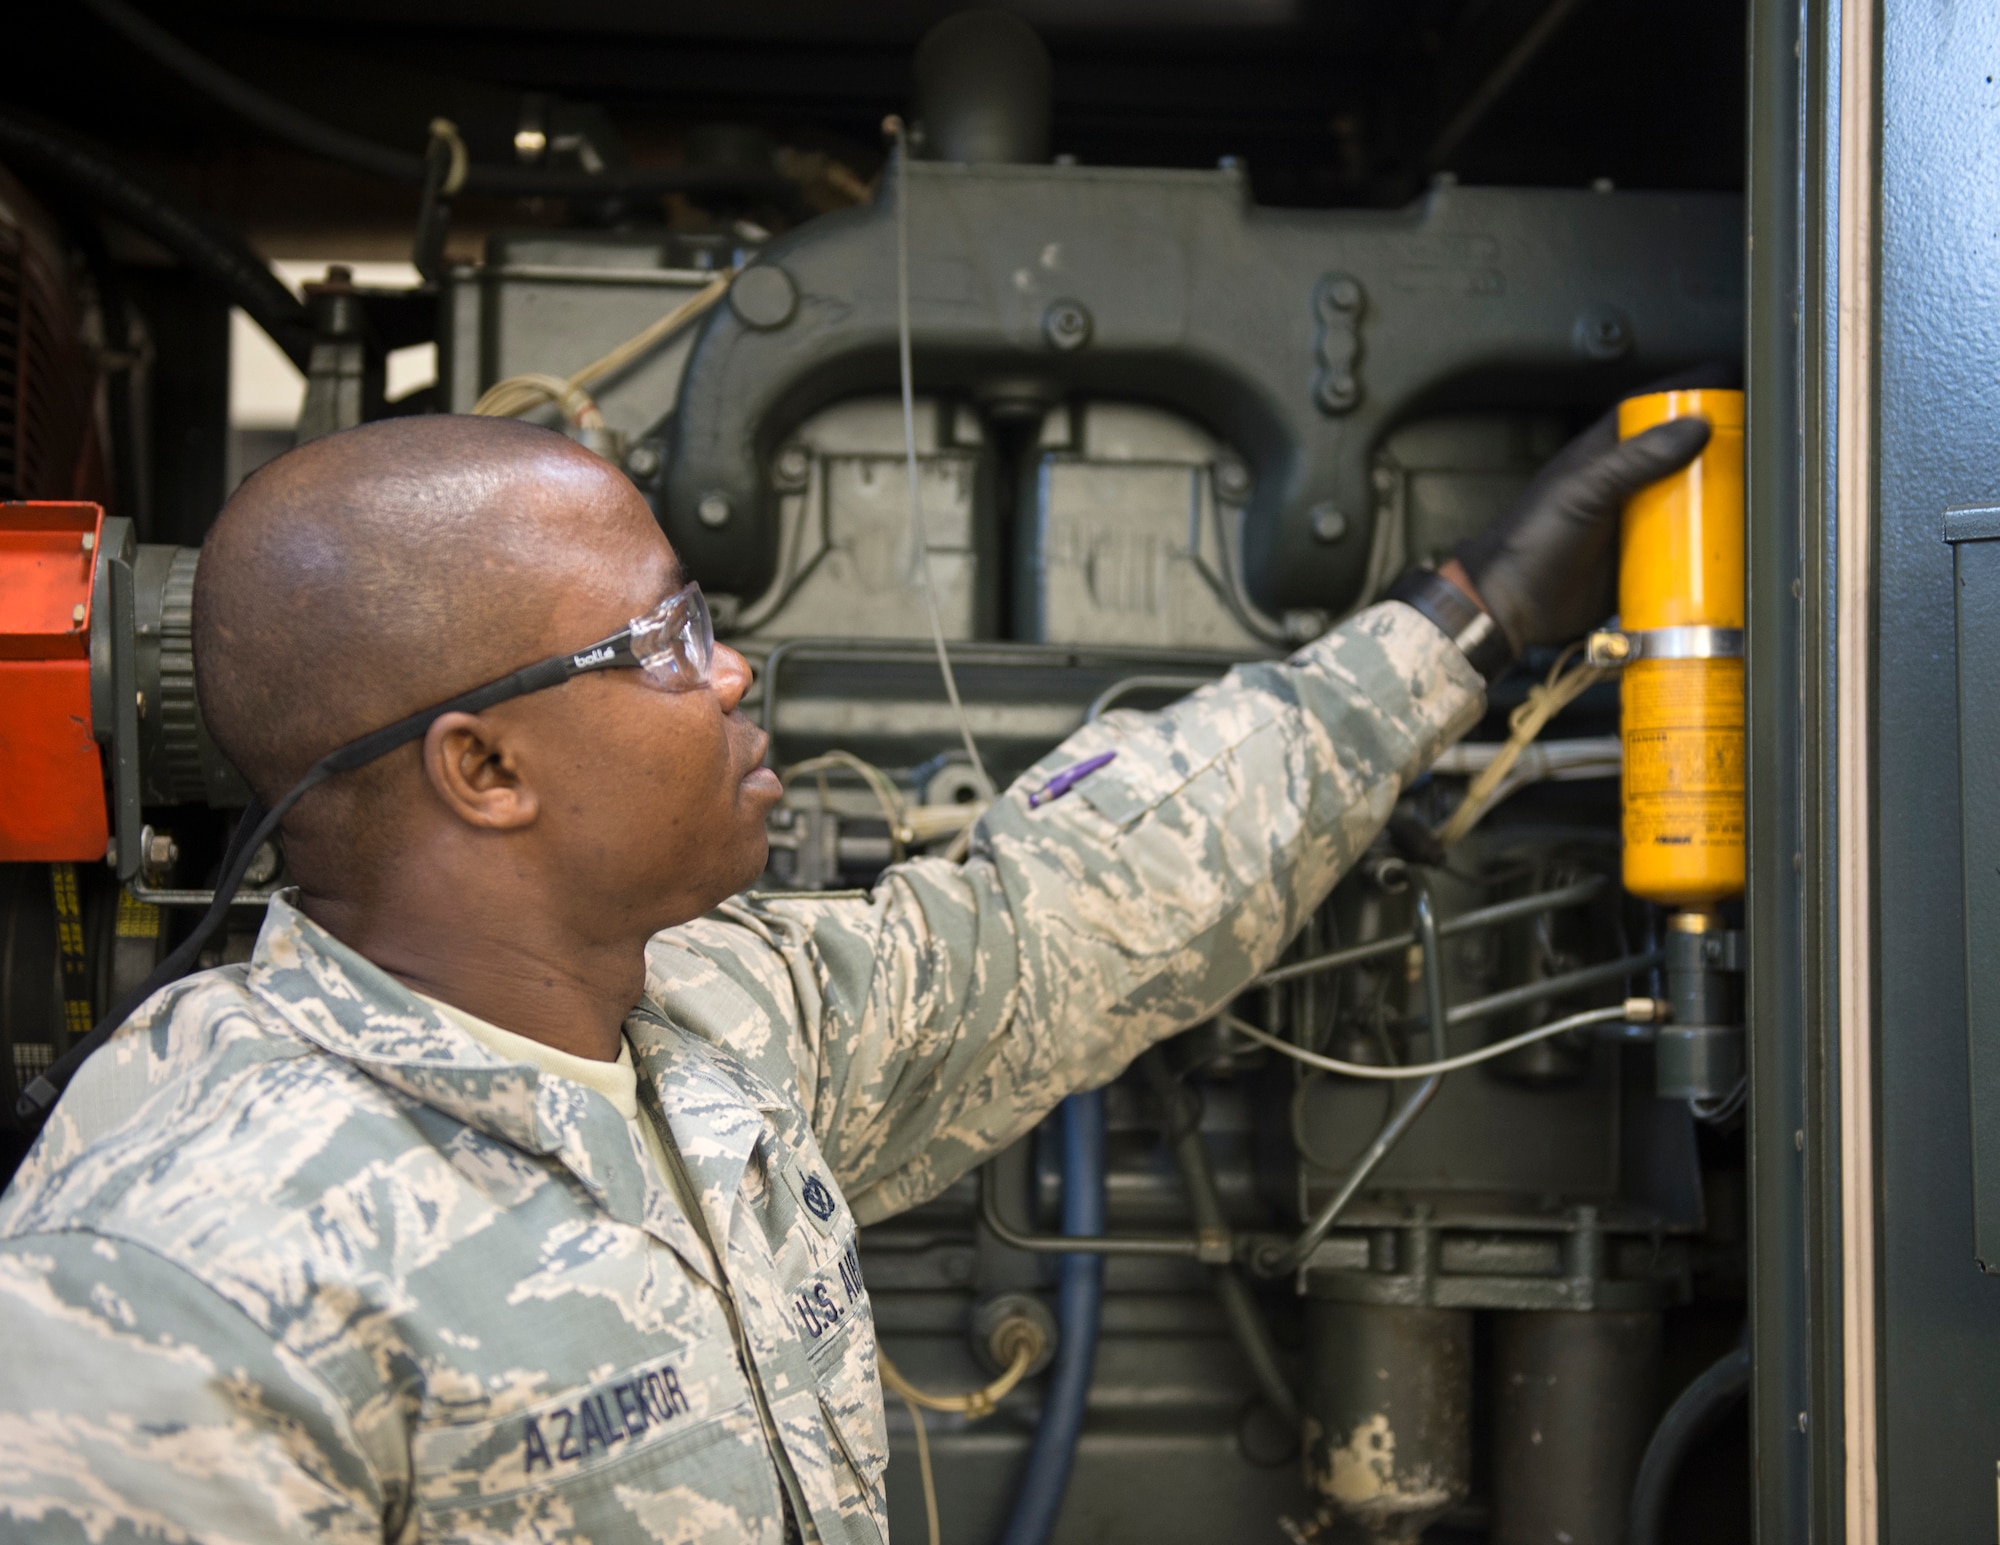 U.S. Air Force Tech. Sgt. Kokou Azalekor, an electrical power production technician with the 133rd Civil Engineer Squadron, replaces the engine start fluid cylinder in St. Paul, Minn., Feb. 12, 2020.